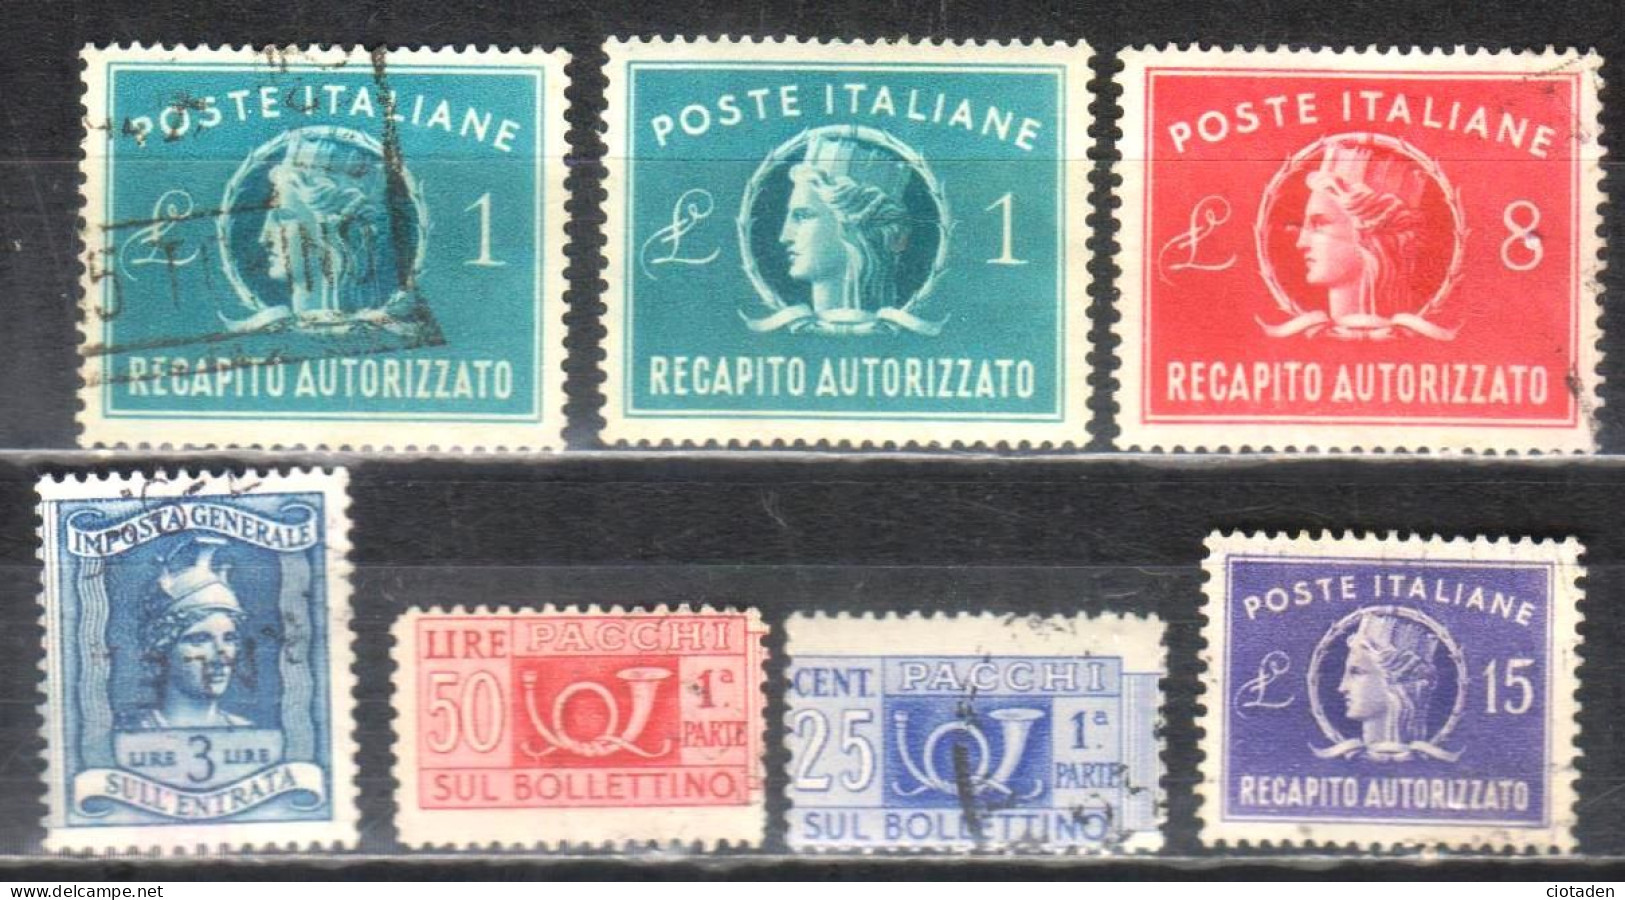 ITALIE - Timbres Fiscaux - Fiscales